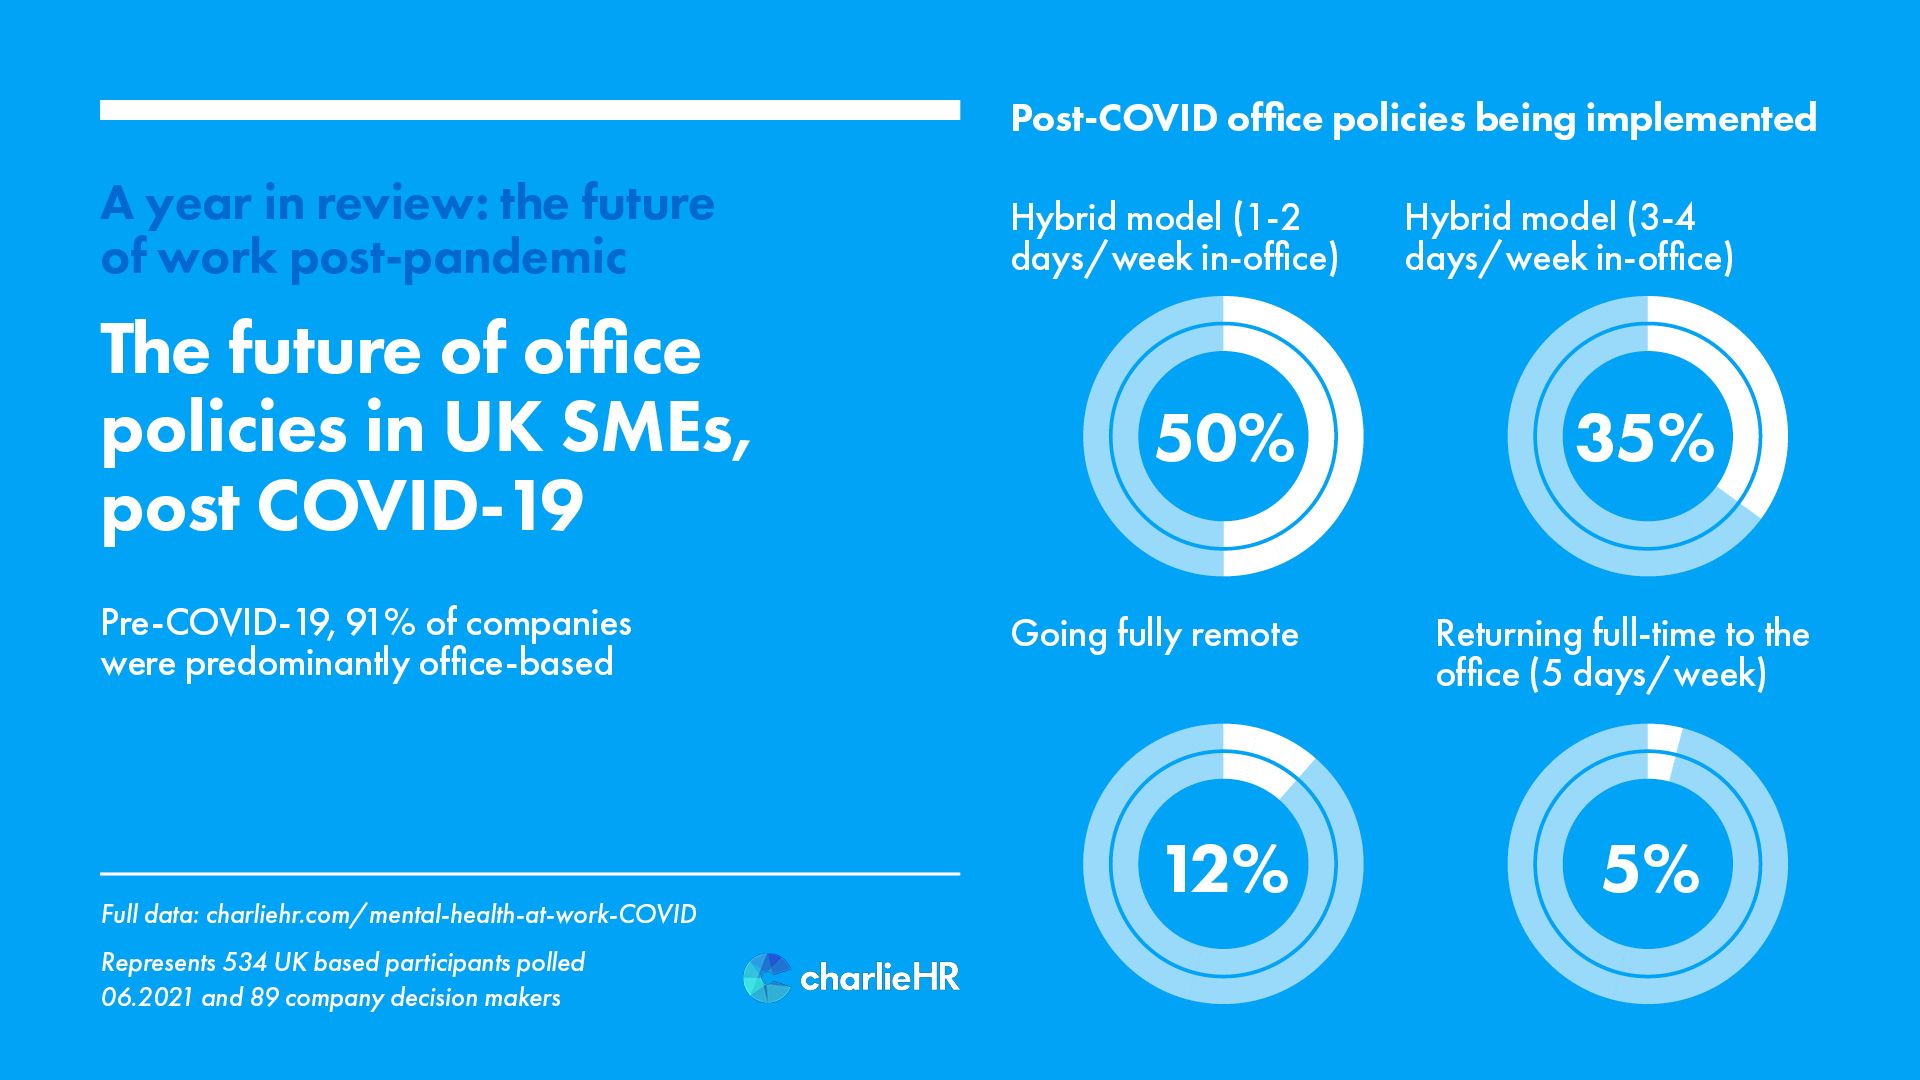 The future of office policies in UK SMEs post covid-19